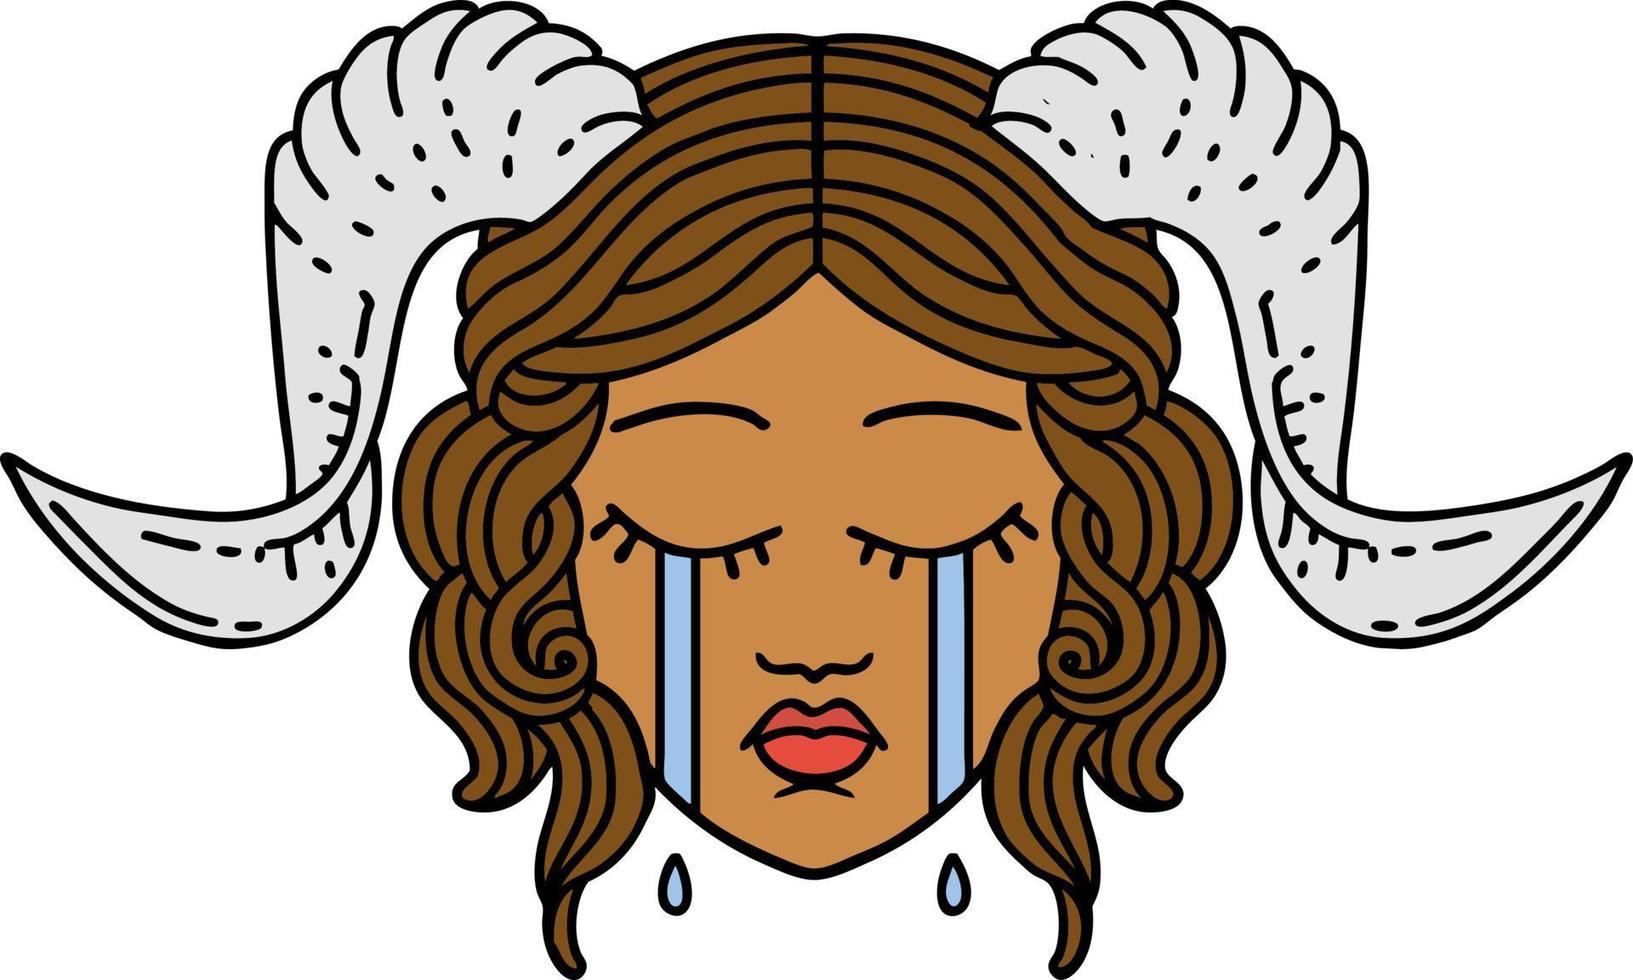 crying tiefling face illustration vector